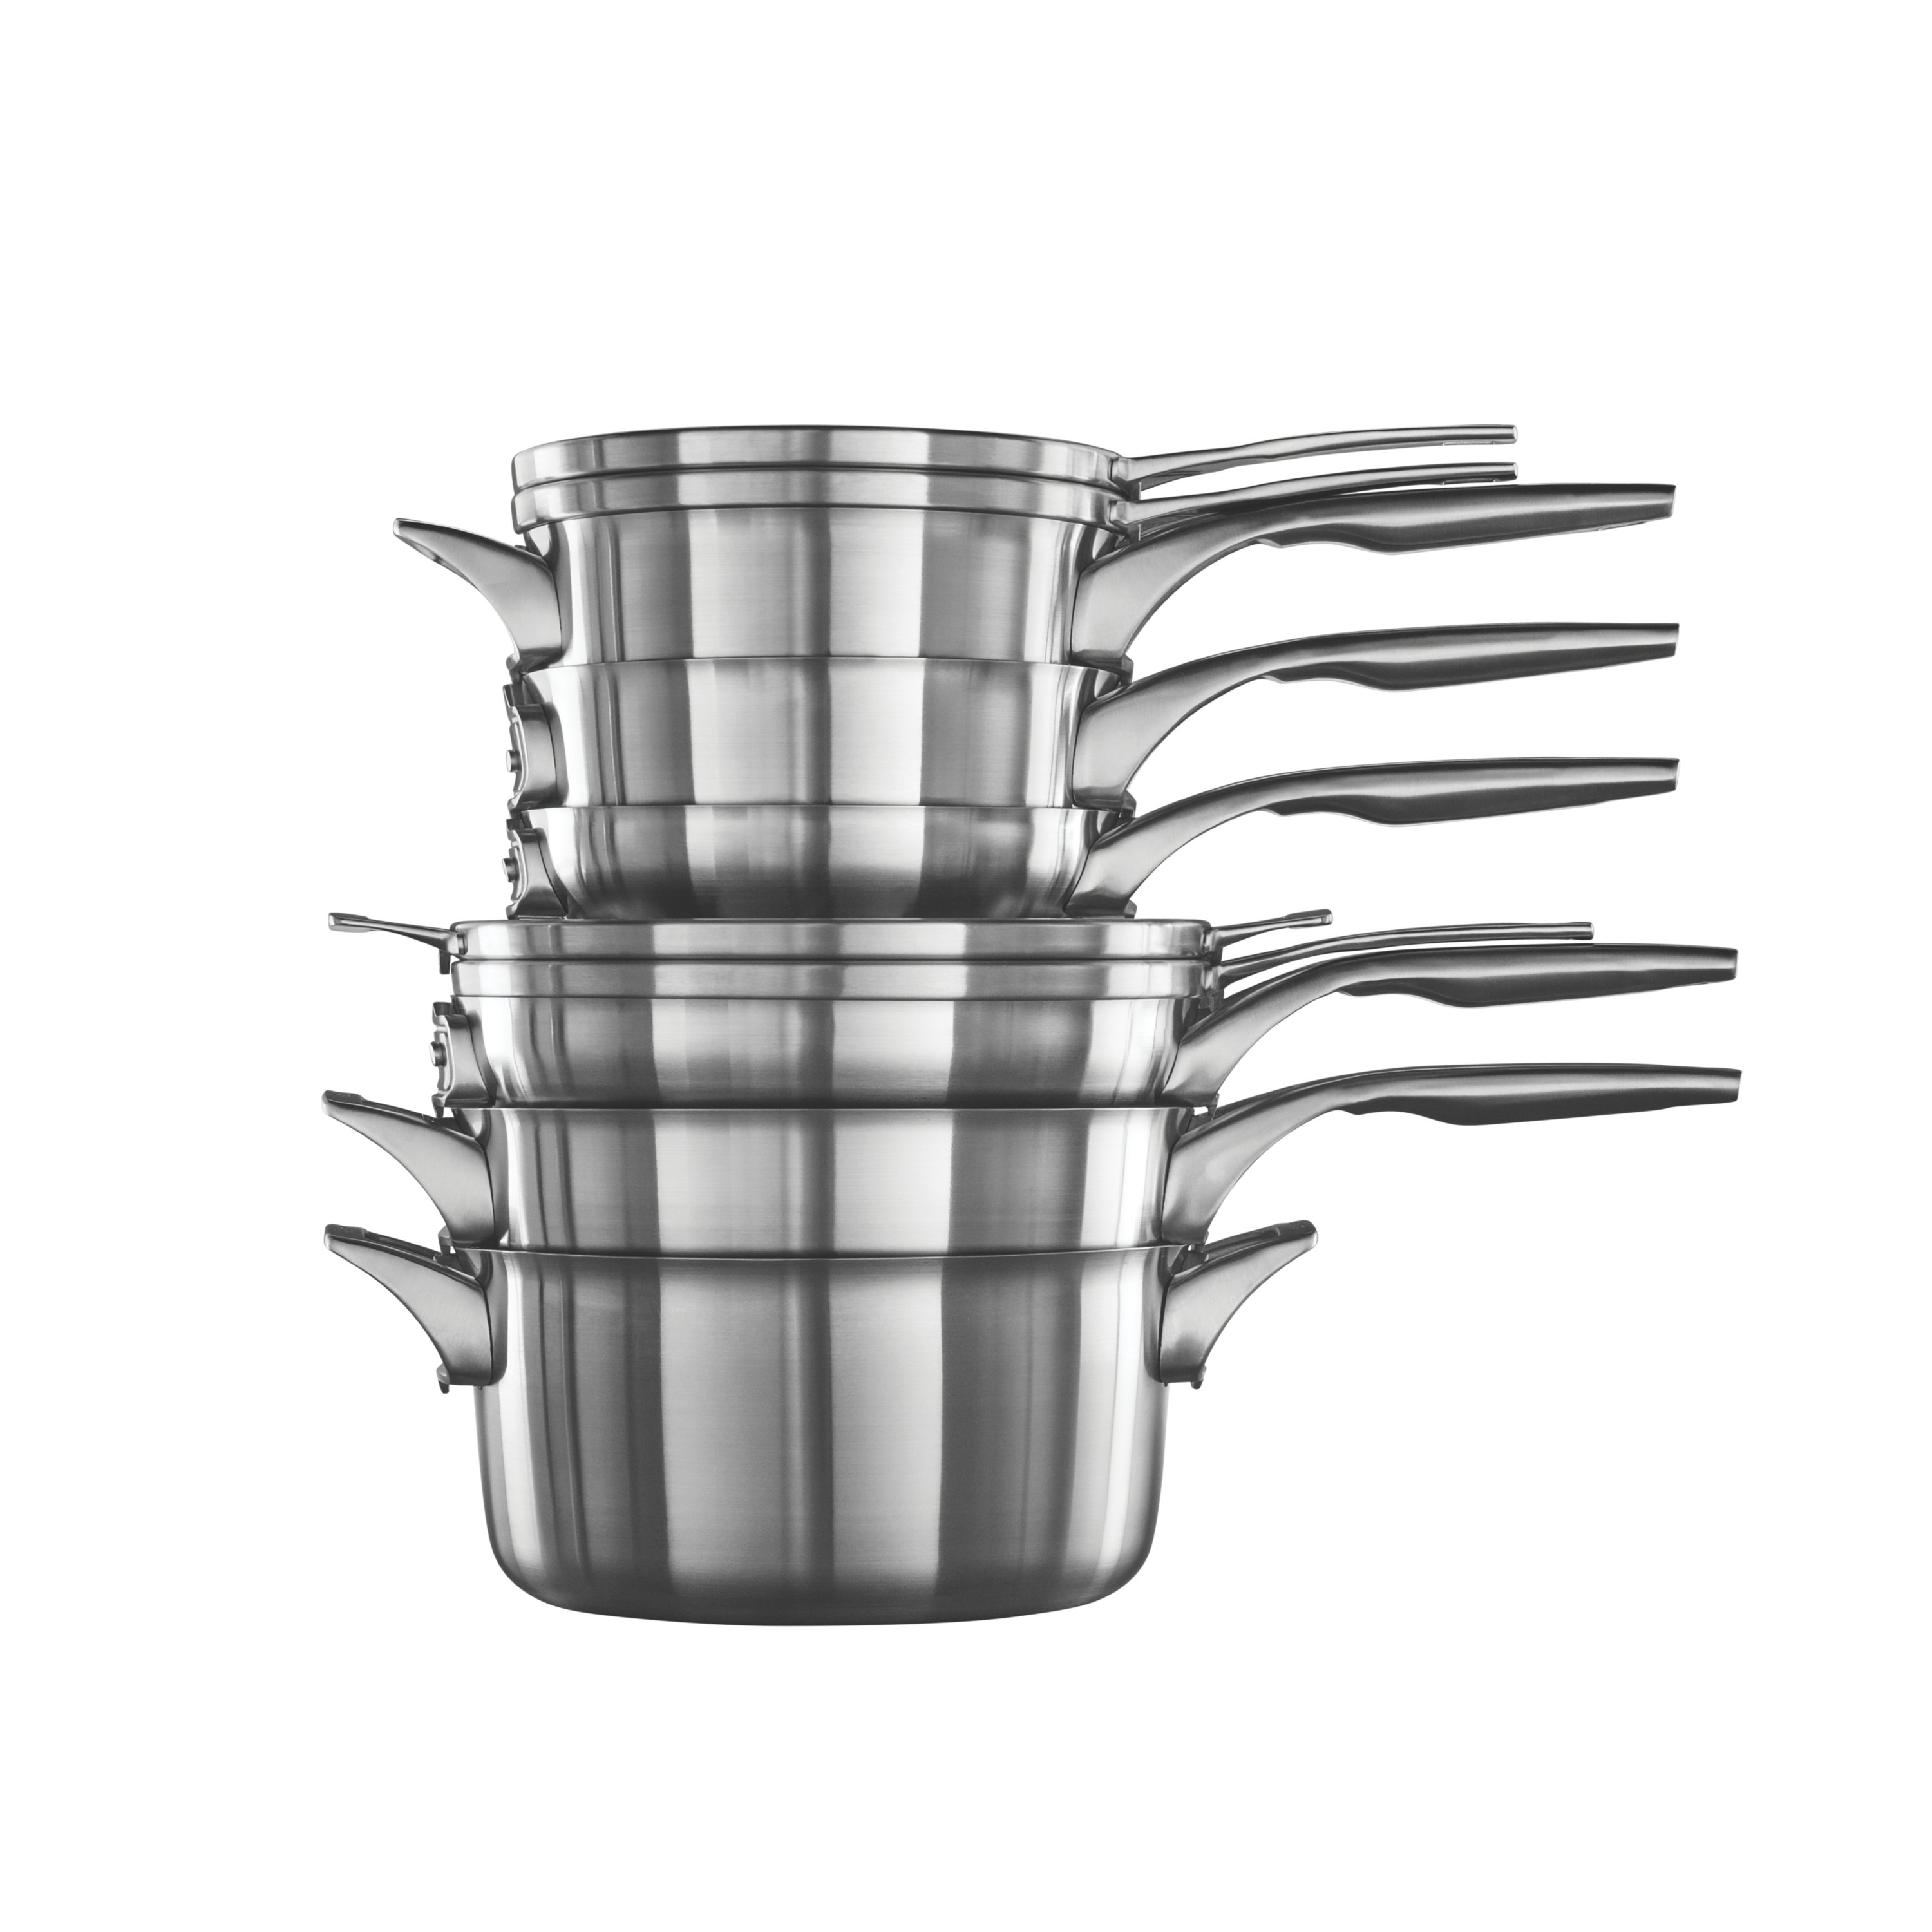 This Stacking Cookware Set From Calphalon Are the Best Pots and Pans I Have  Ever Used